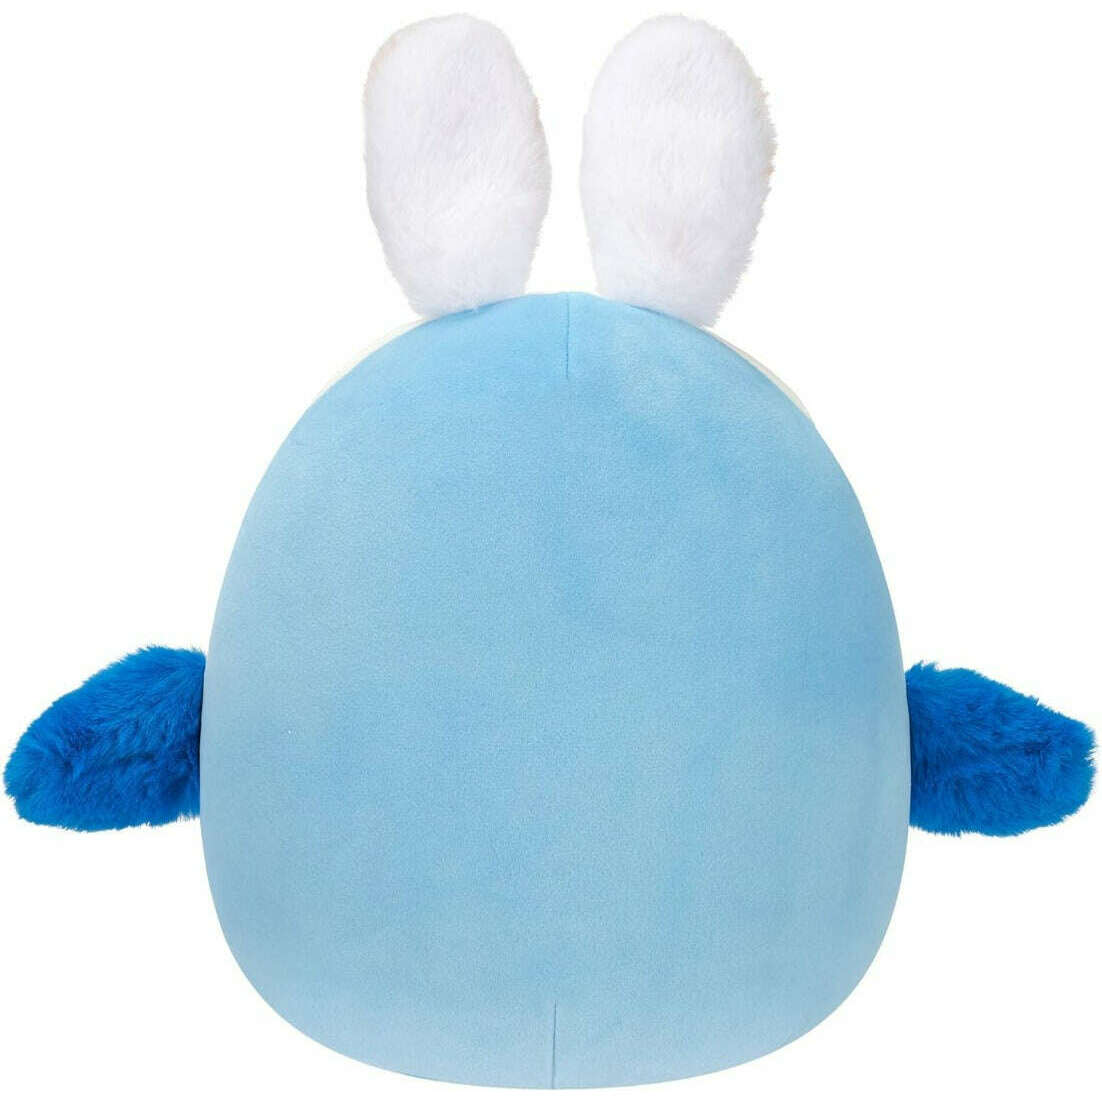 Toys N Tuck:Squishmallows Easter 7.5 Inch Plush - Bebe The Bird,Squishmallows